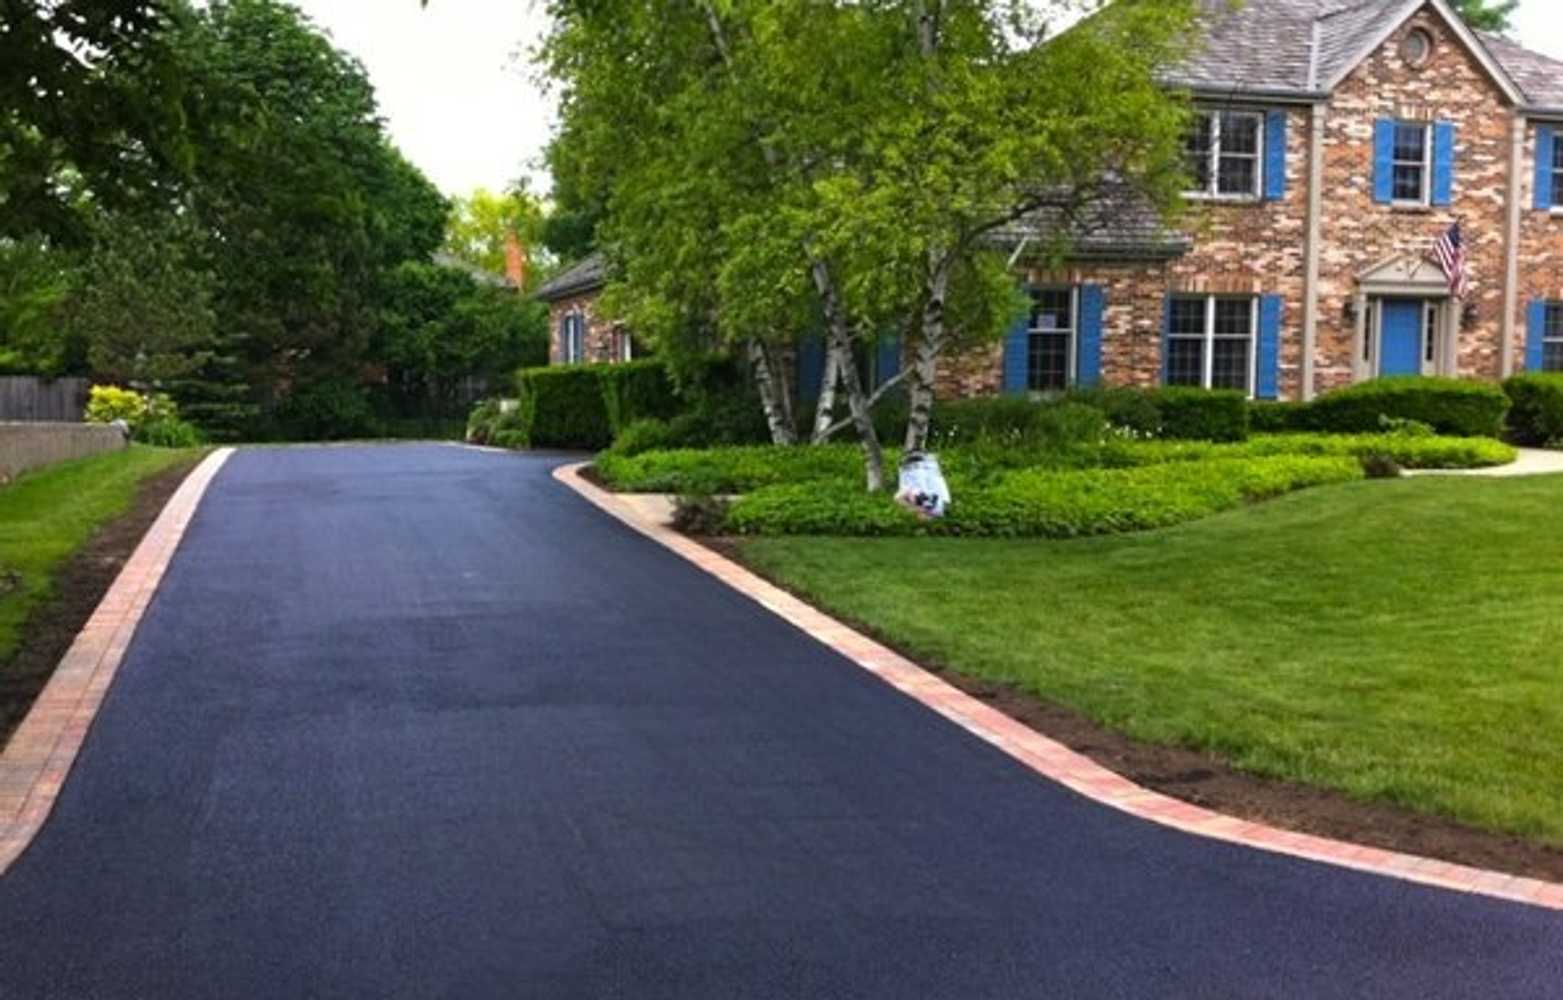 How could you add more shining to the driveway for the happiness of your clients - PaintOutlet.co.uk